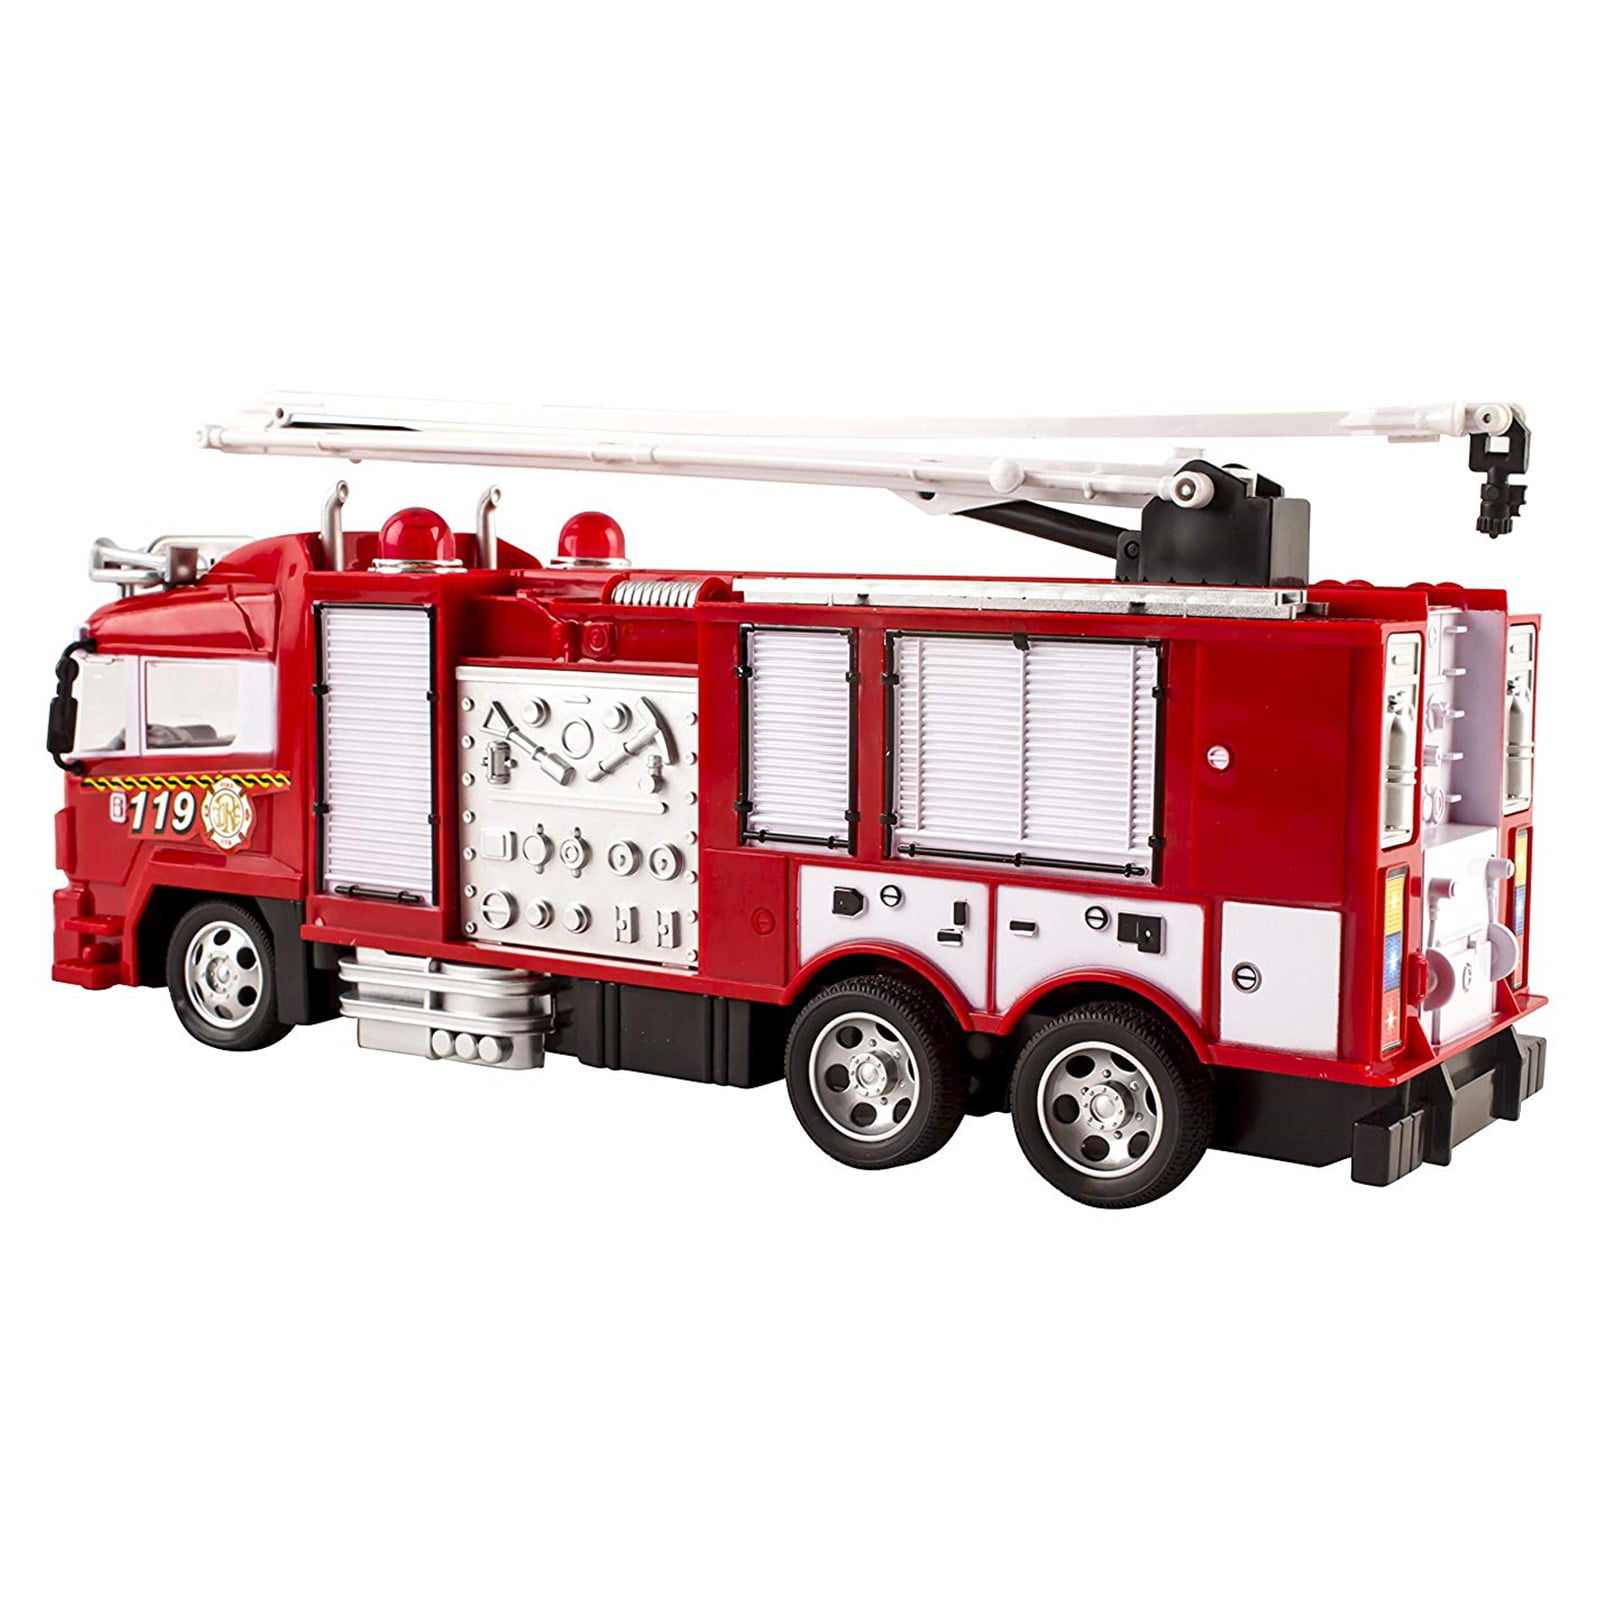 Realistic Rc Trucks Toddler with Fire Ladder New Remote Control Fire Truck Toy 